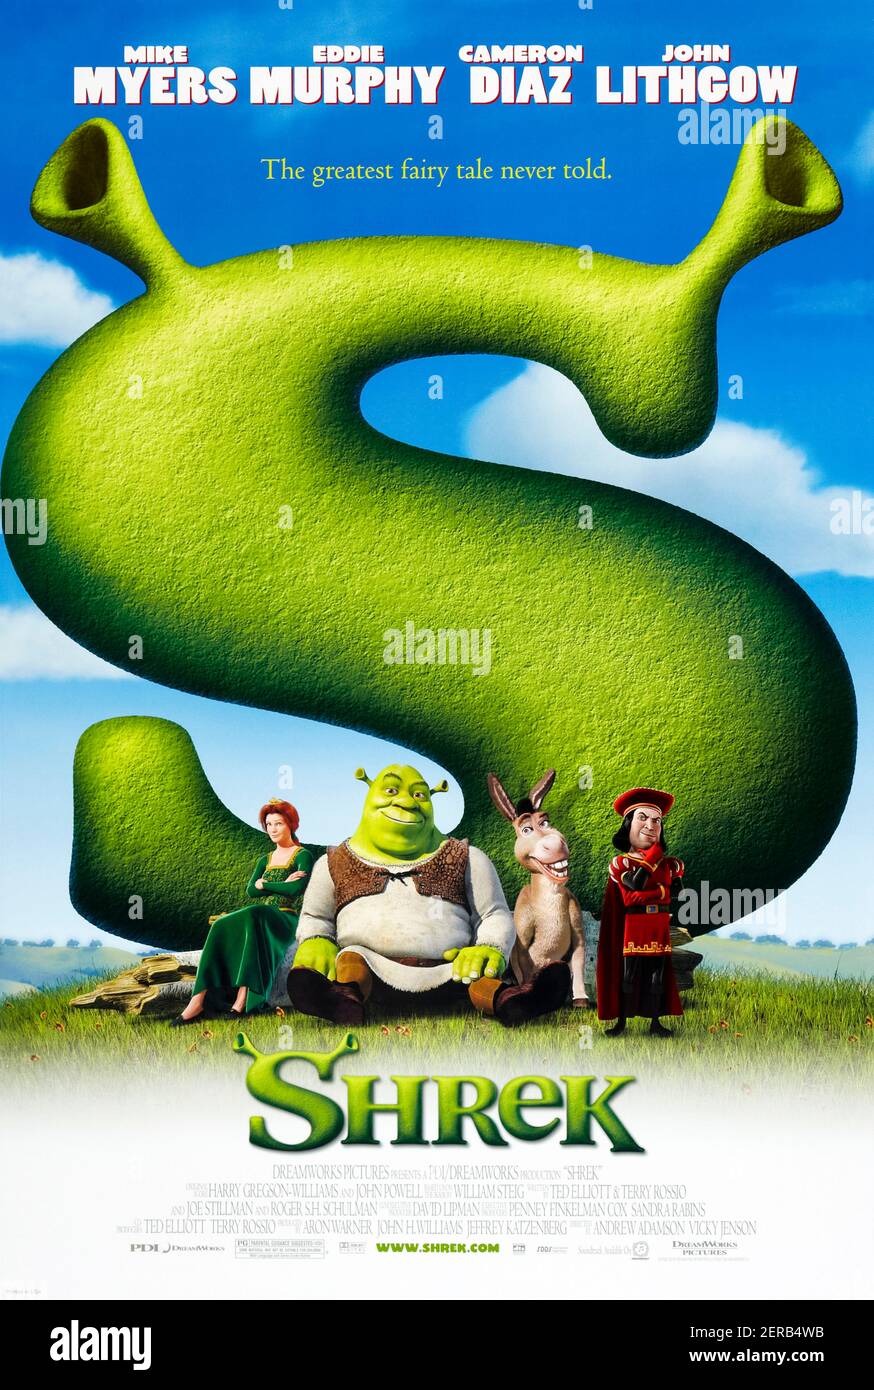 Shrek (2001) directed by Scott Kalvert and starring Mike Myers, Eddie Murphy and Cameron Diaz . A mean lord exiles fairytale creatures to the swamp of a grumpy ogre, who must go on a quest and rescue a princess for the lord in order to get his land back. Stock Photo